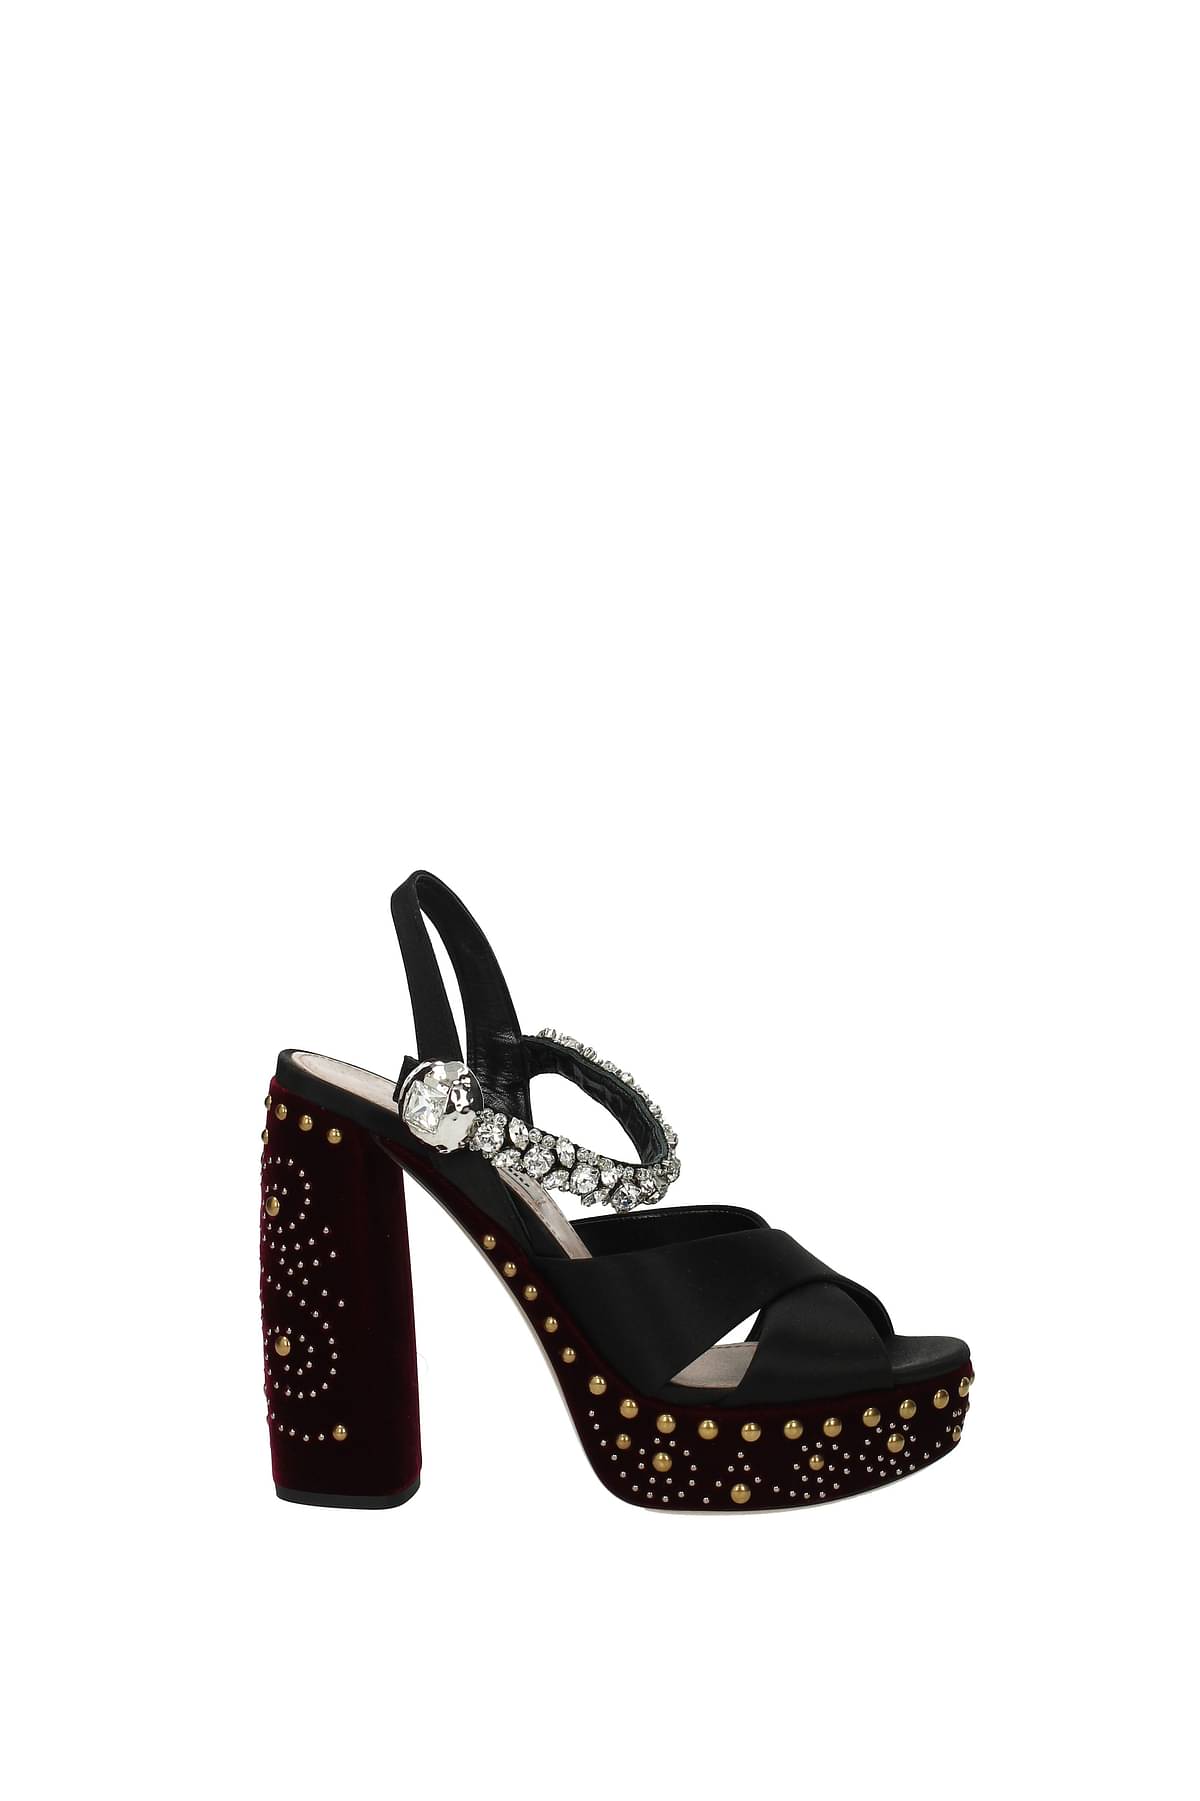 2013 Auntum new style rhinestone pumps shoes with red sole 14cm